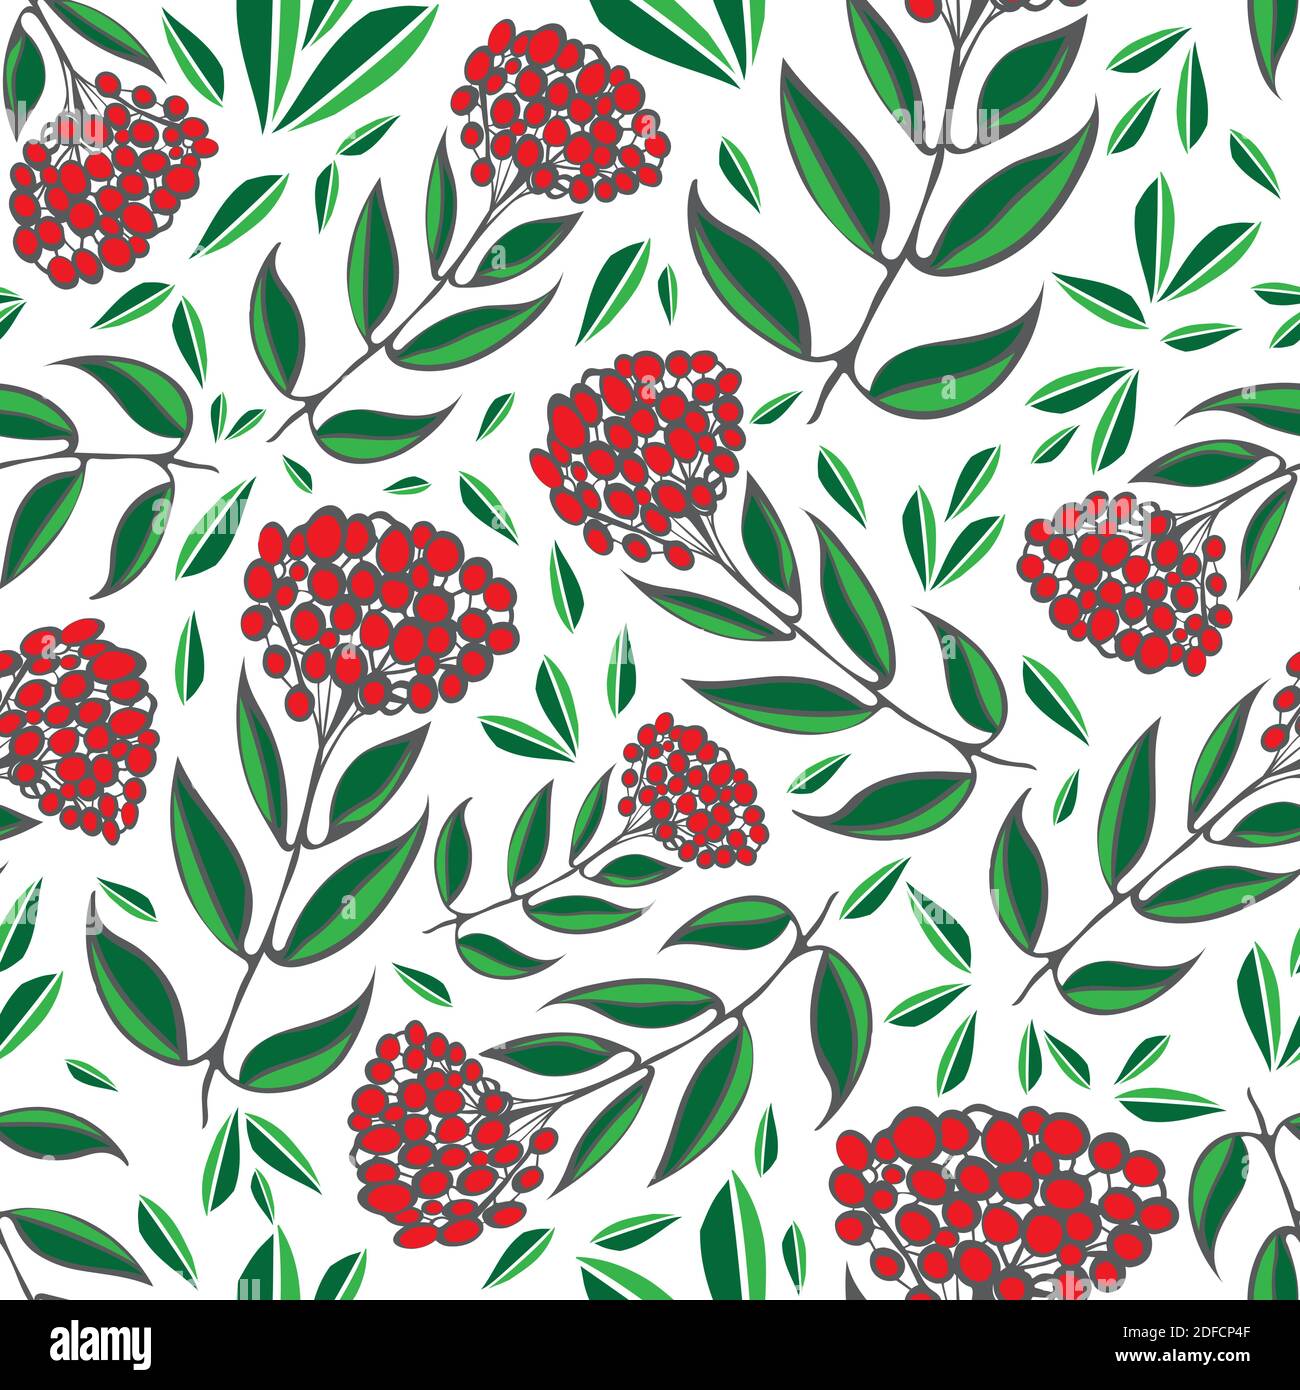 Vector Cotoneaster berries and leaves. Seamless red, white, green pattern background. Backdrop with scattered hand drawn forest garden fruit and Stock Vector